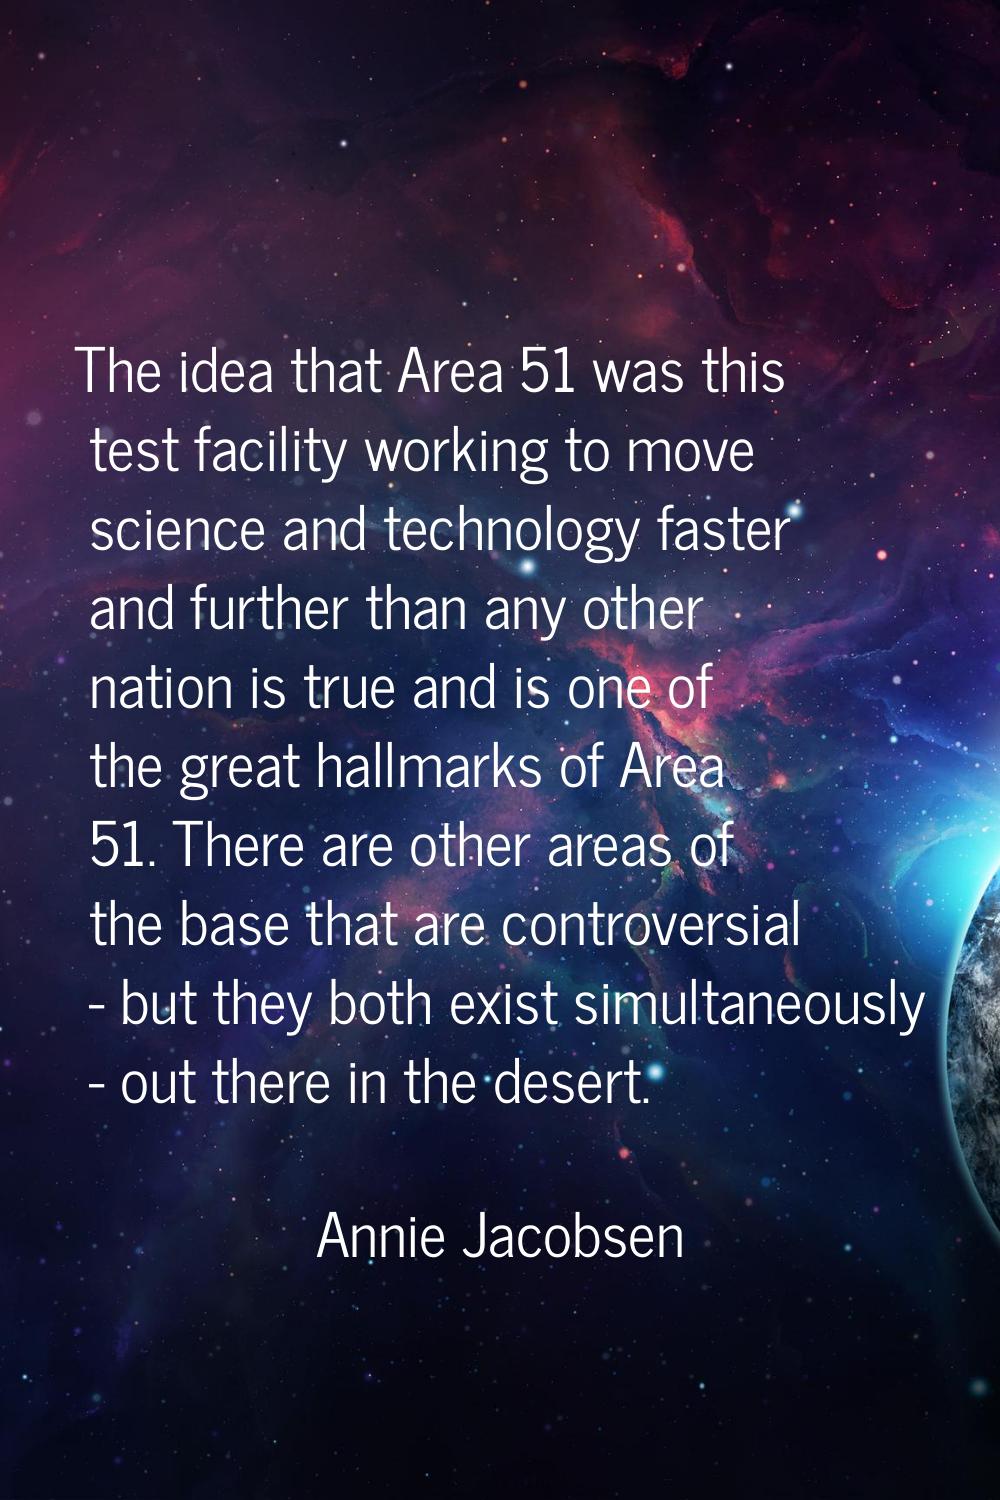 The idea that Area 51 was this test facility working to move science and technology faster and furt